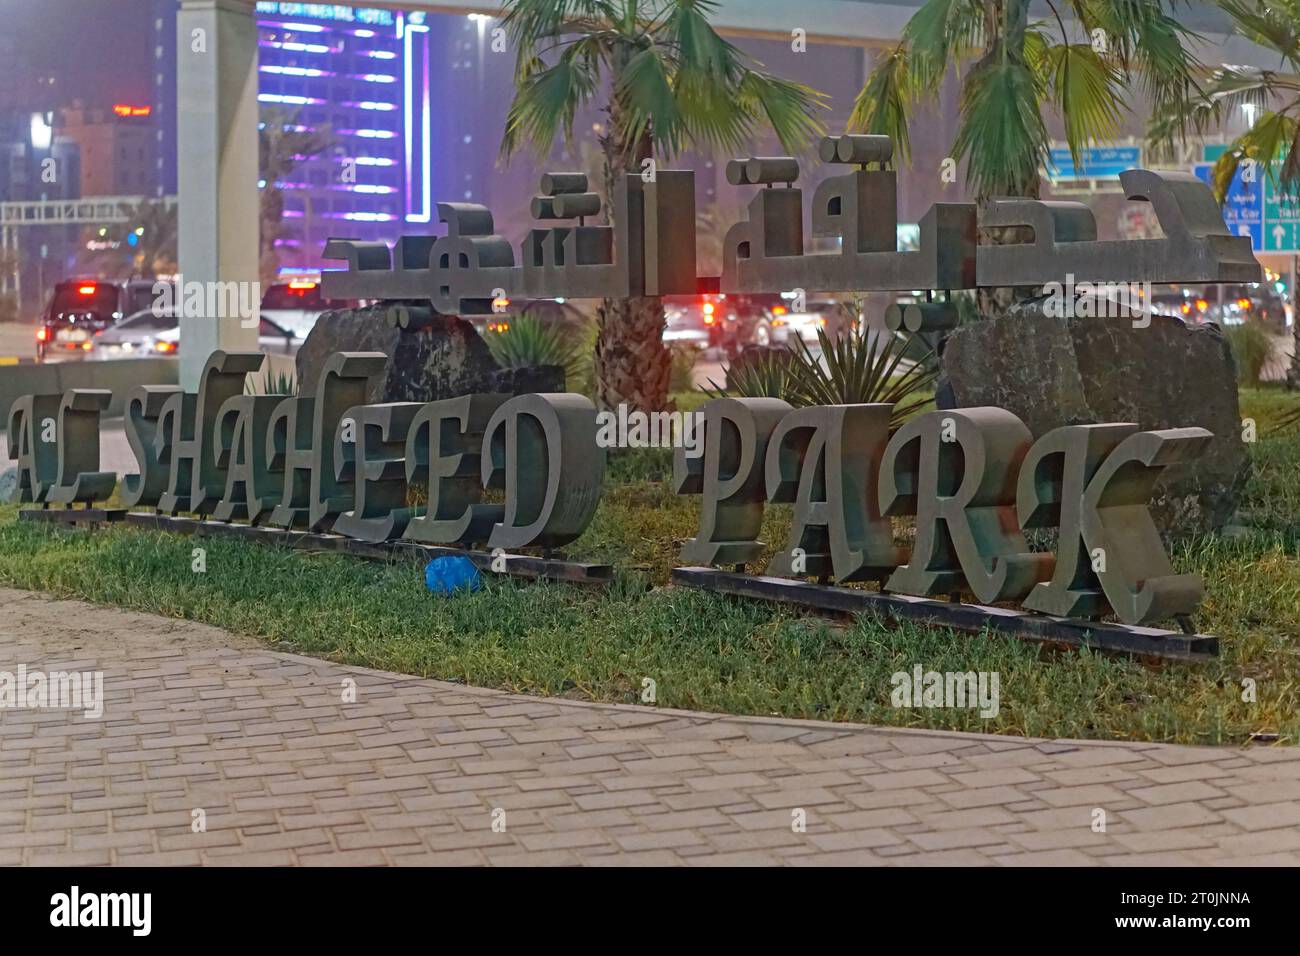 Kuwait City, Kuwait - June 22, 2018: 3d sign Al Shaheed park at night in city centre. Stock Photo